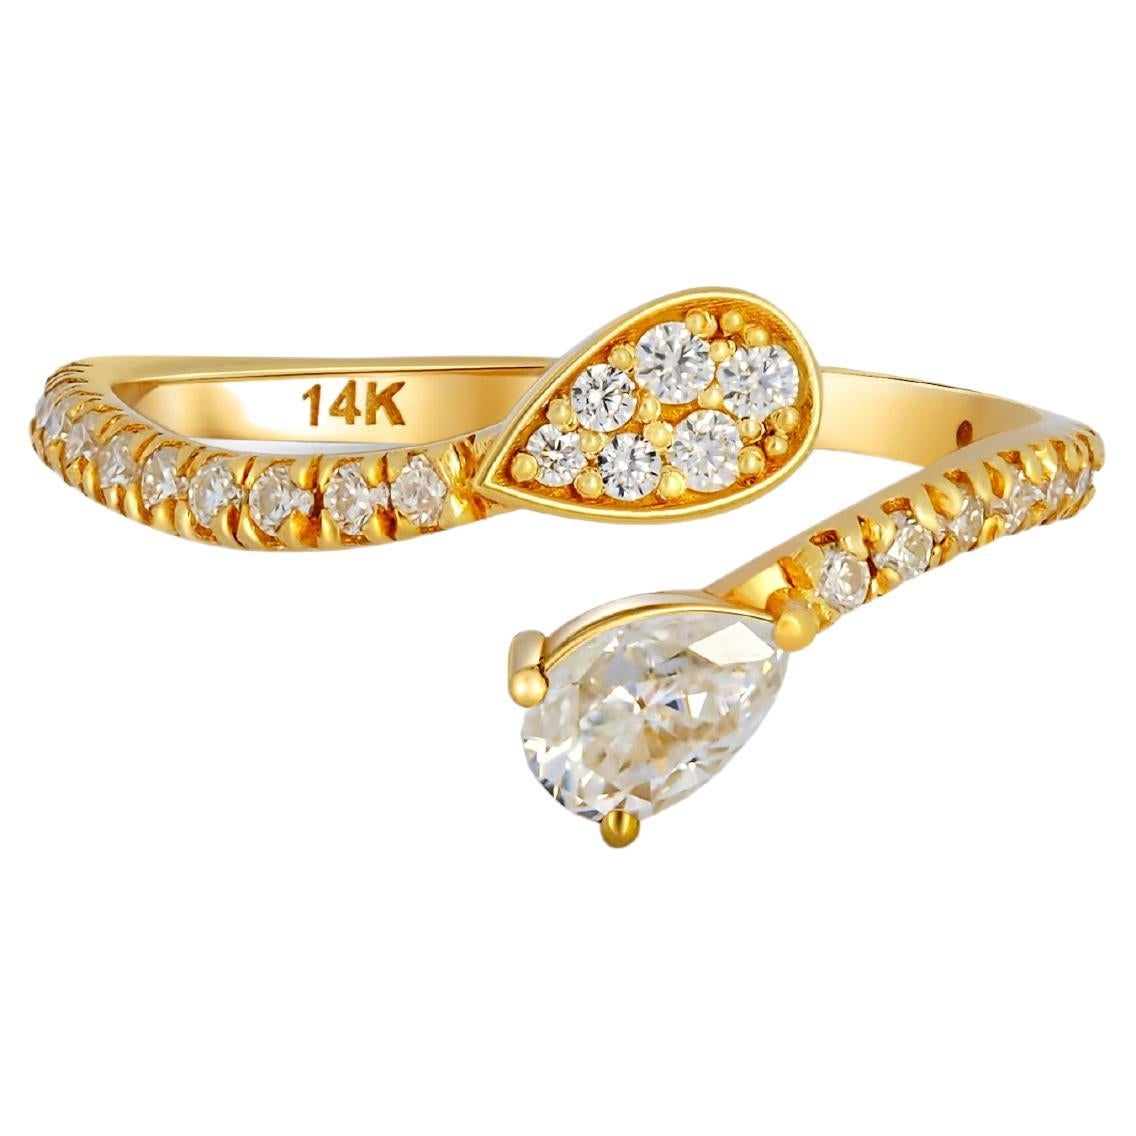 For Sale:  Pear and round diamond cut moissanite open ended 14k gold ring.